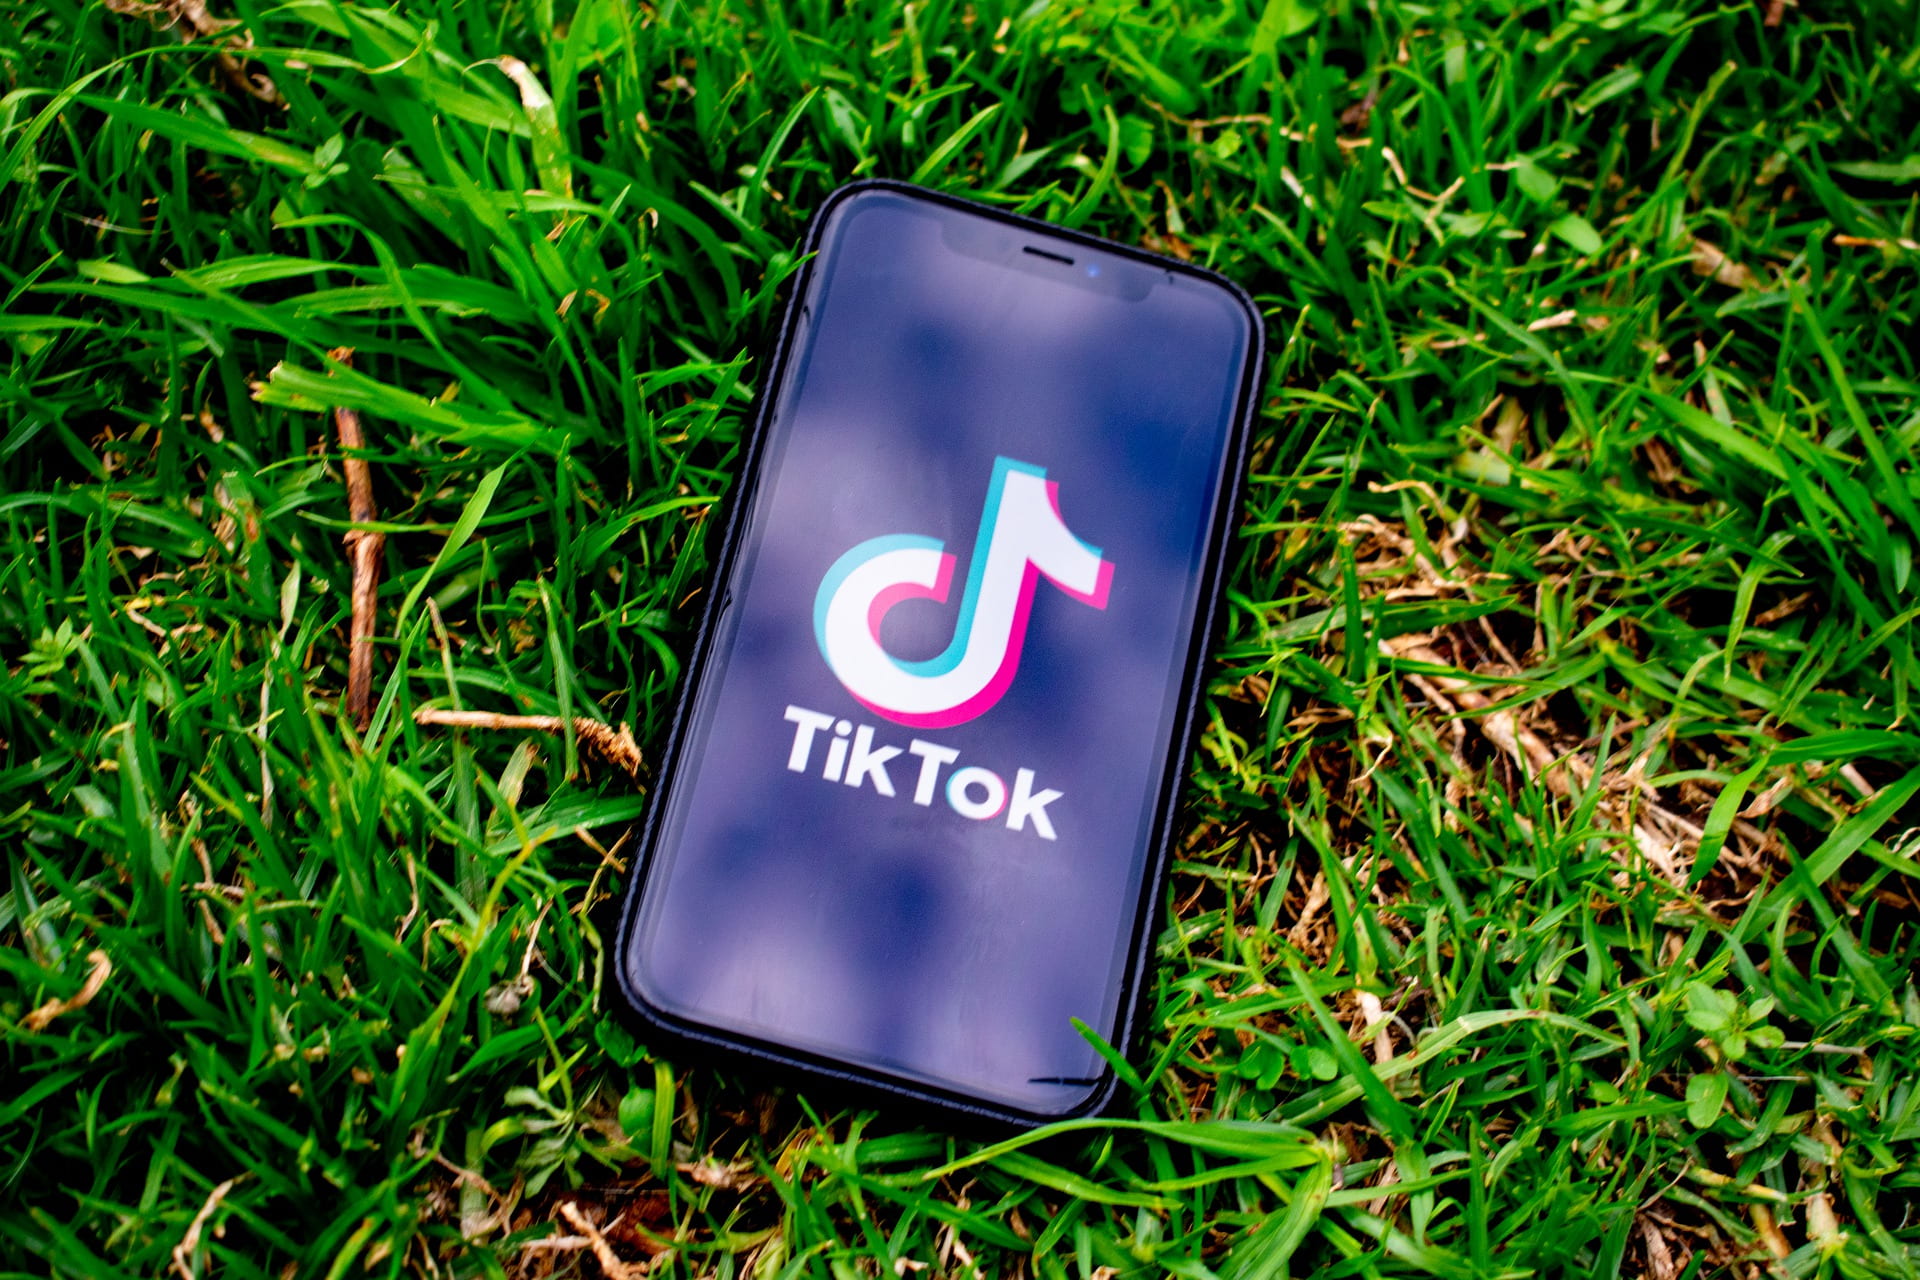 Breaking Down the TikTok Playbook to Take on Instagram (and Everyone Else)